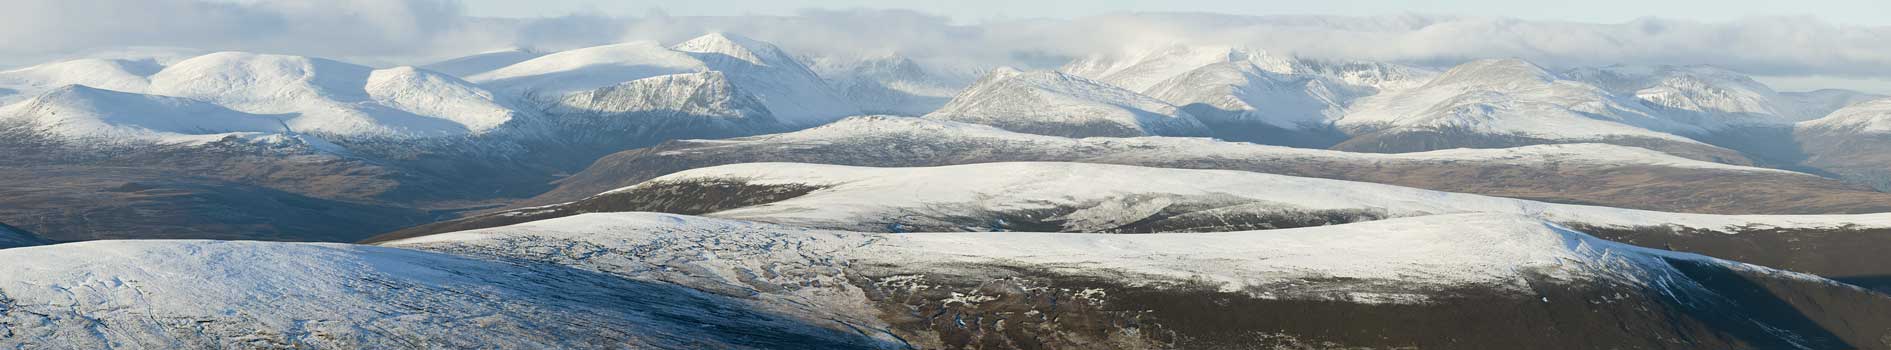 The Southern Cairngorms from Carn Bhac, 17 December 2006